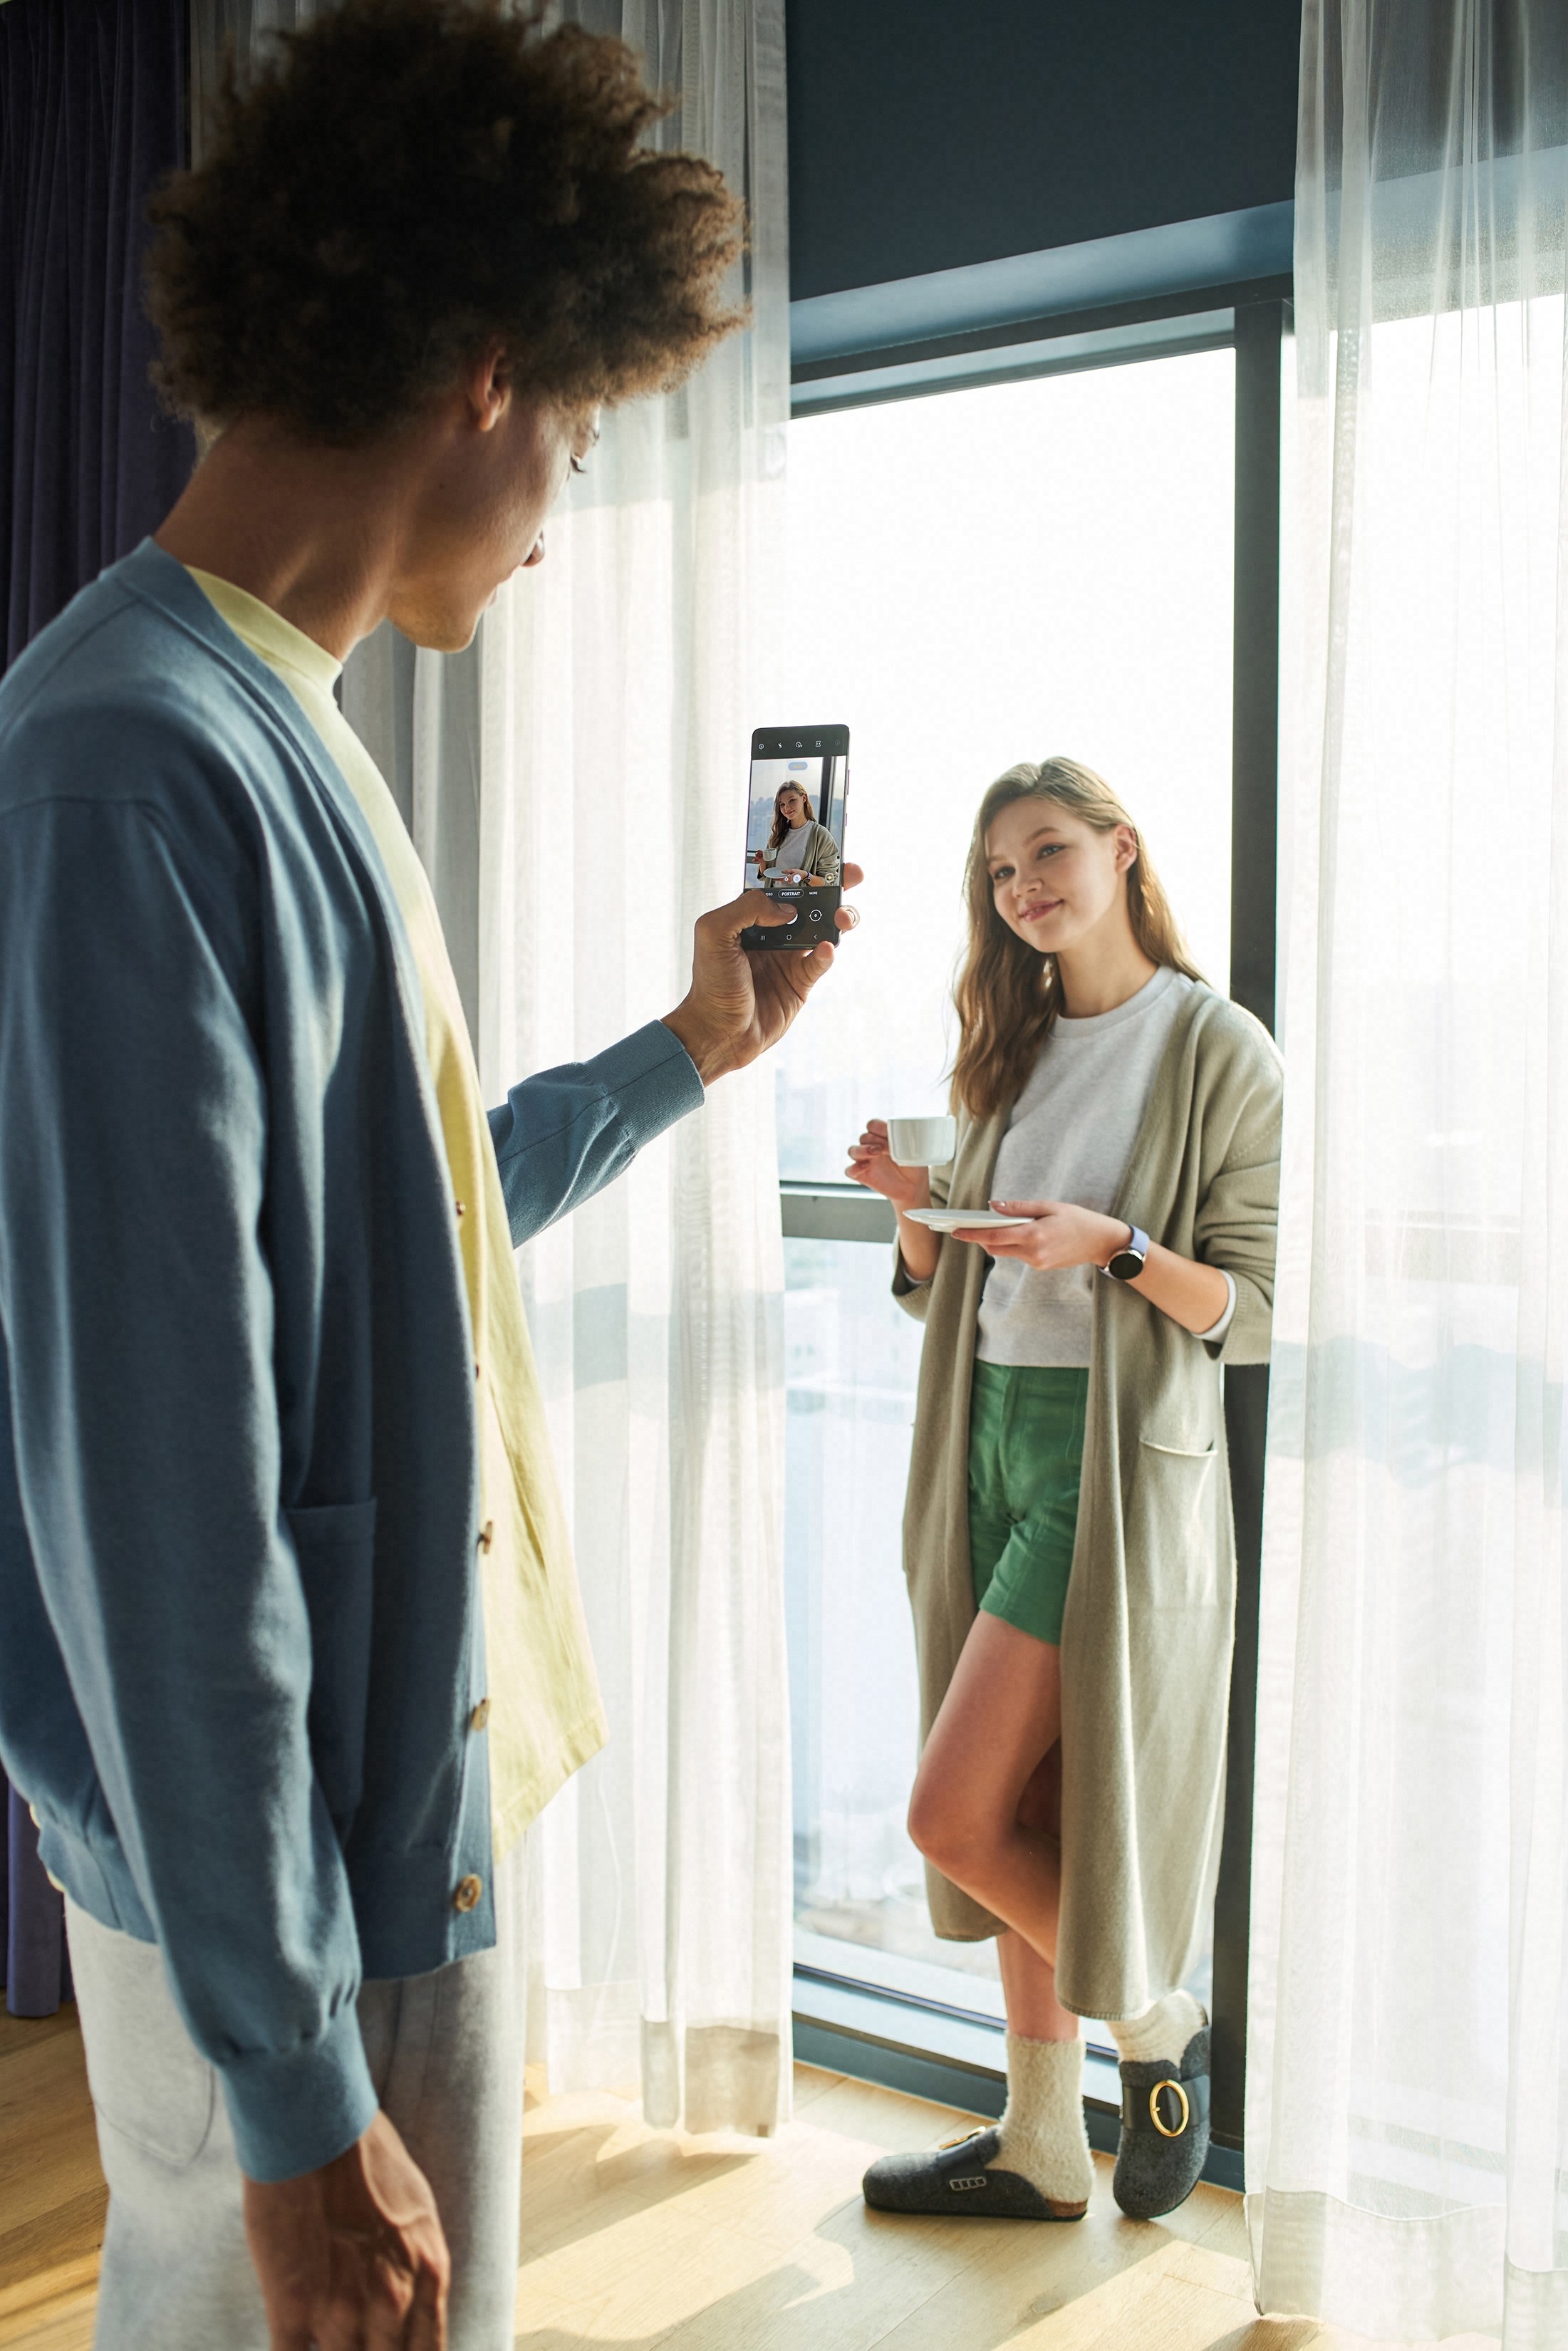 A girl in a green robe poses with a cup of coffee beside a window as a boy takes a photo on his cellphone.